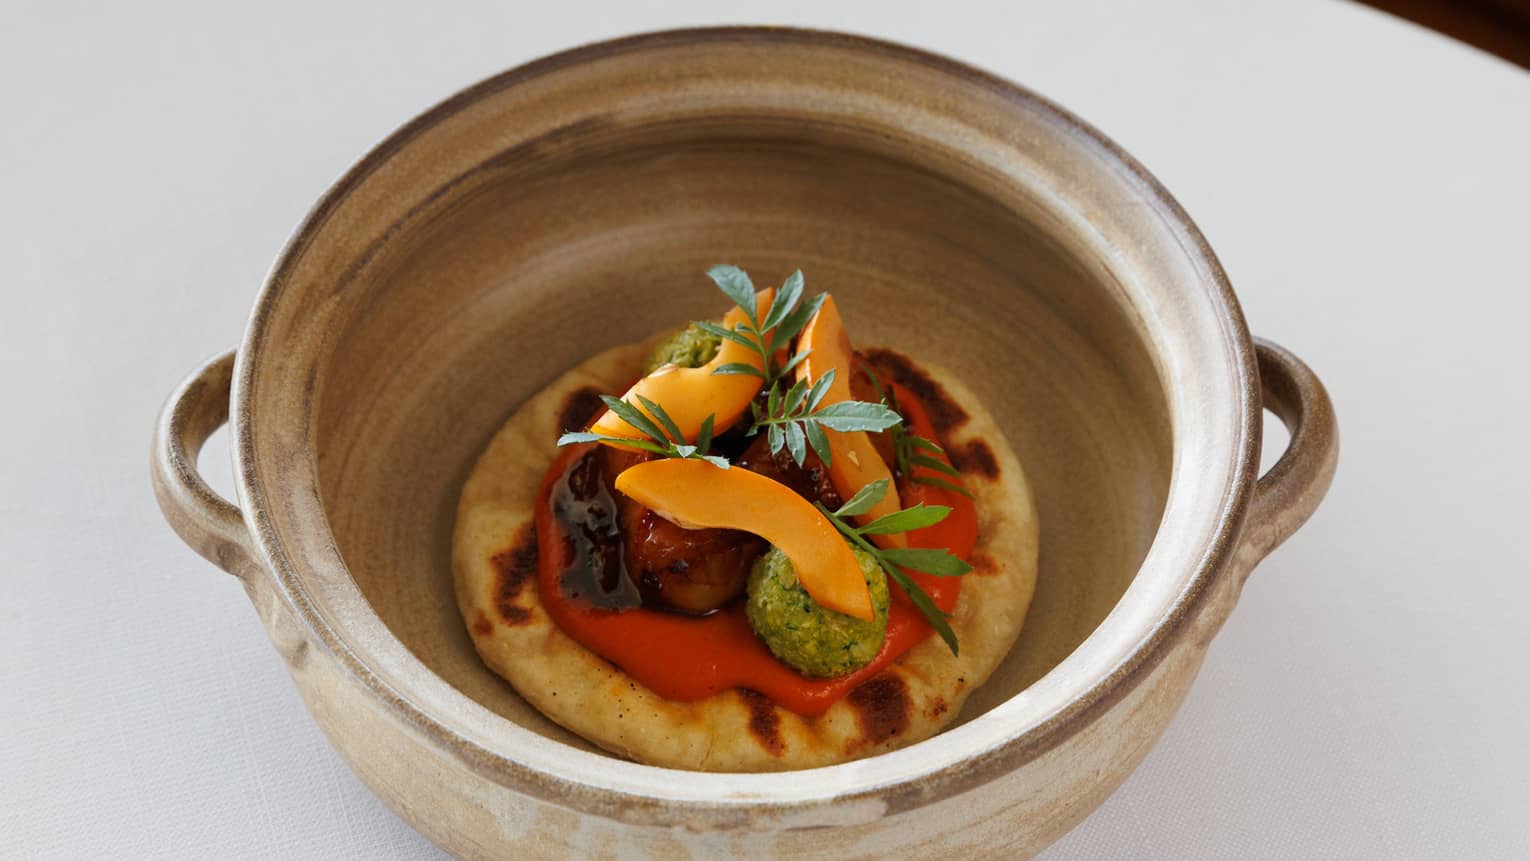 Lobster Topped with Romesco Sauce, Chickpea, Apricot and Tagete in tan ceramic crock on white table